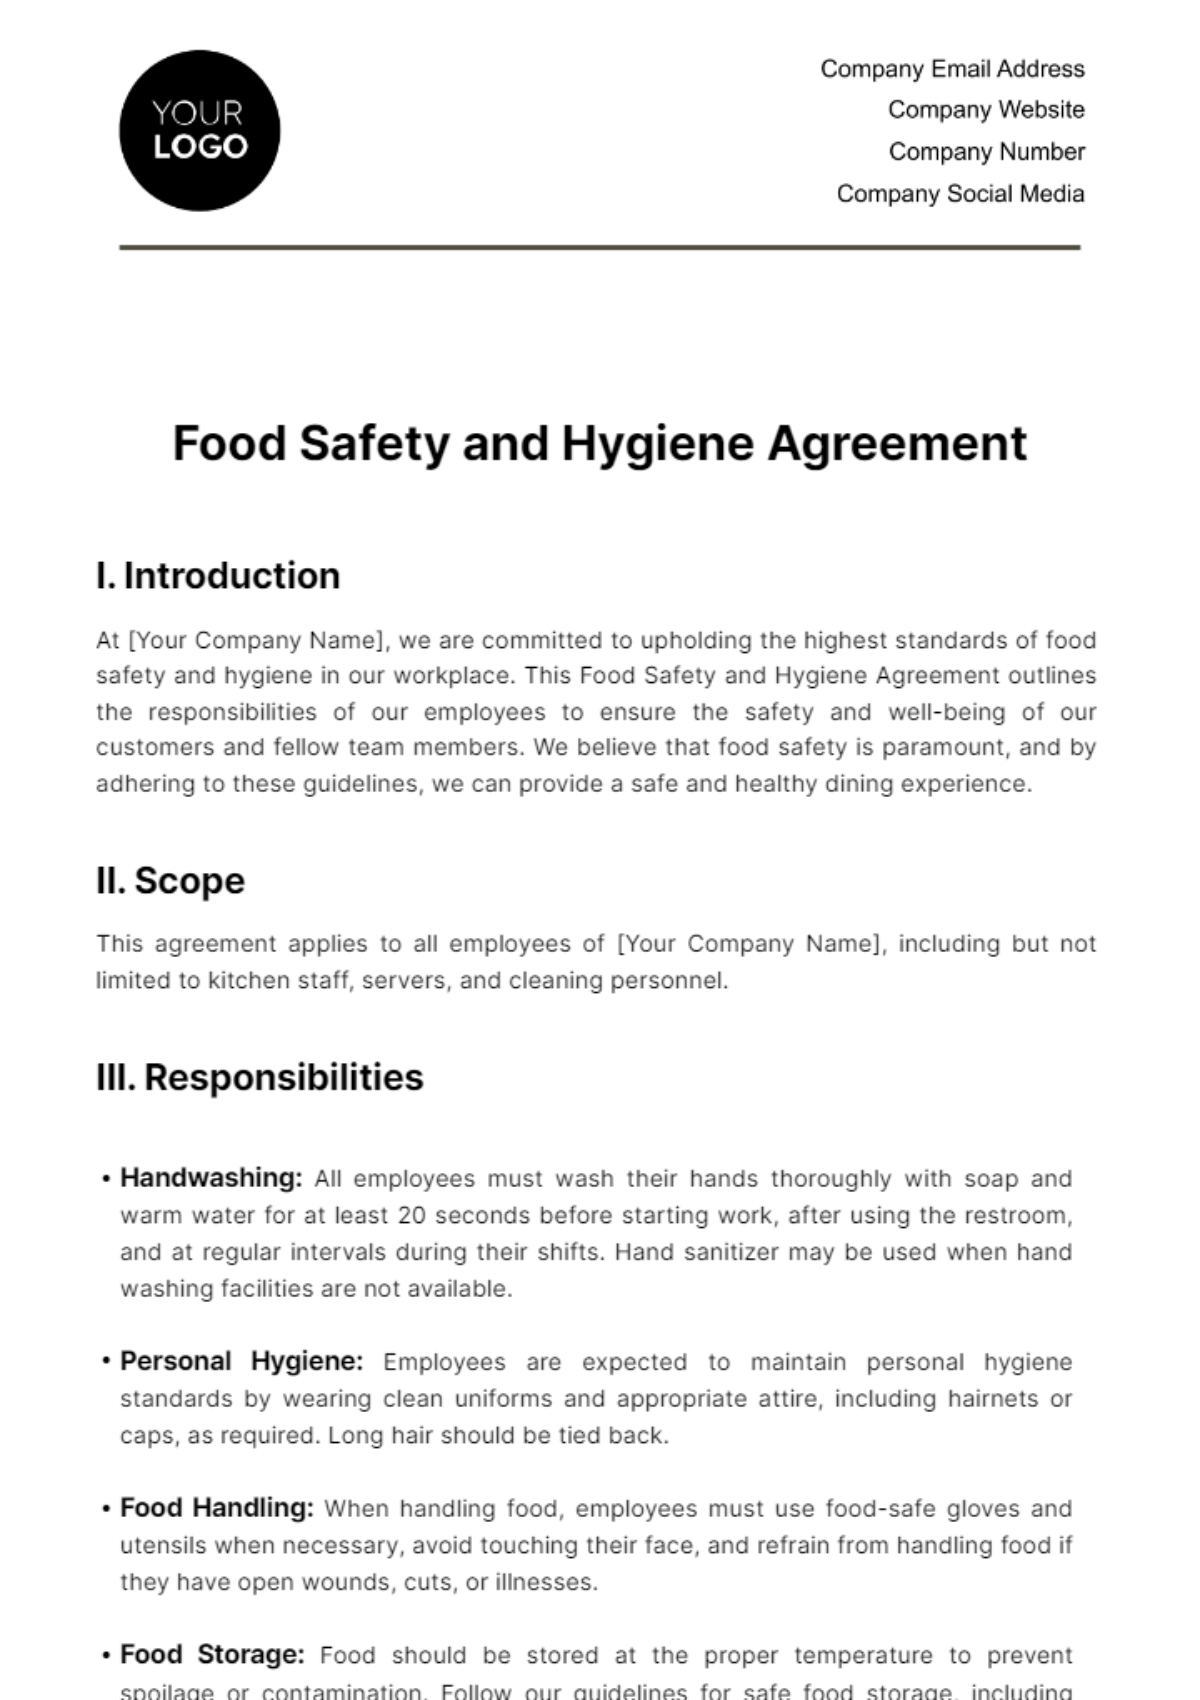 Free Food Safety and Hygiene Agreement HR Template